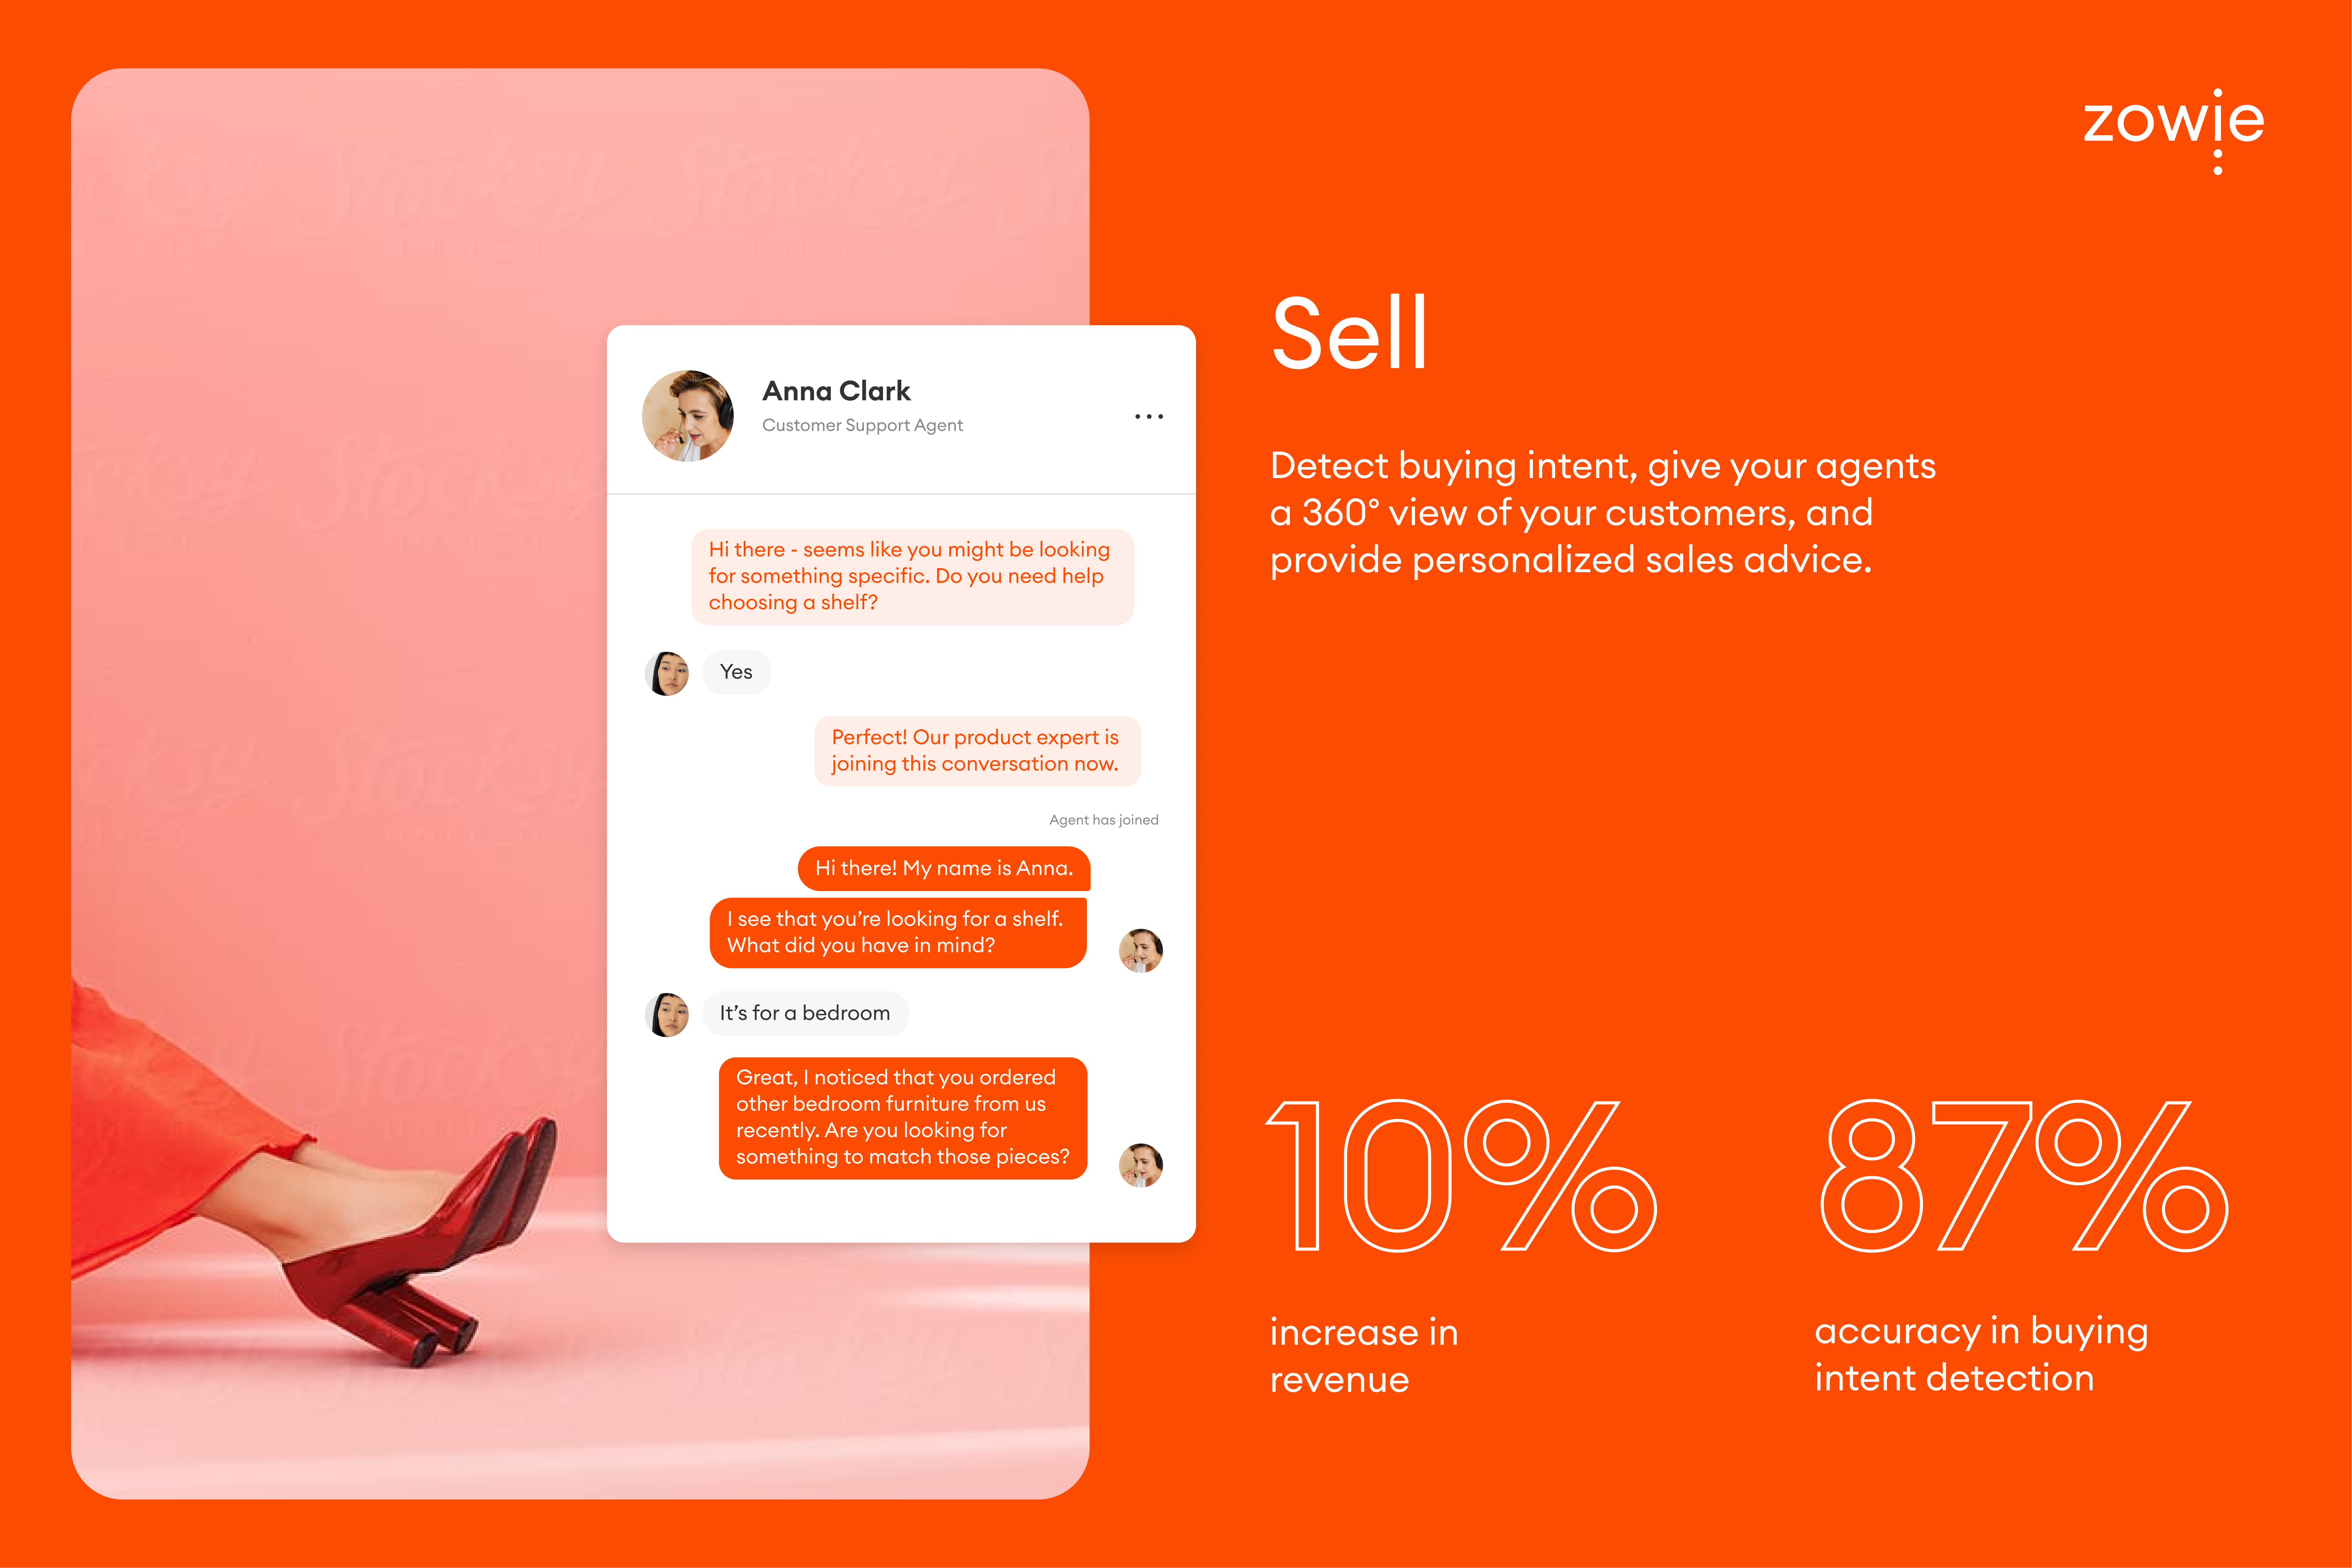 Sell – detect buying intent and convert up to 40% more clients.